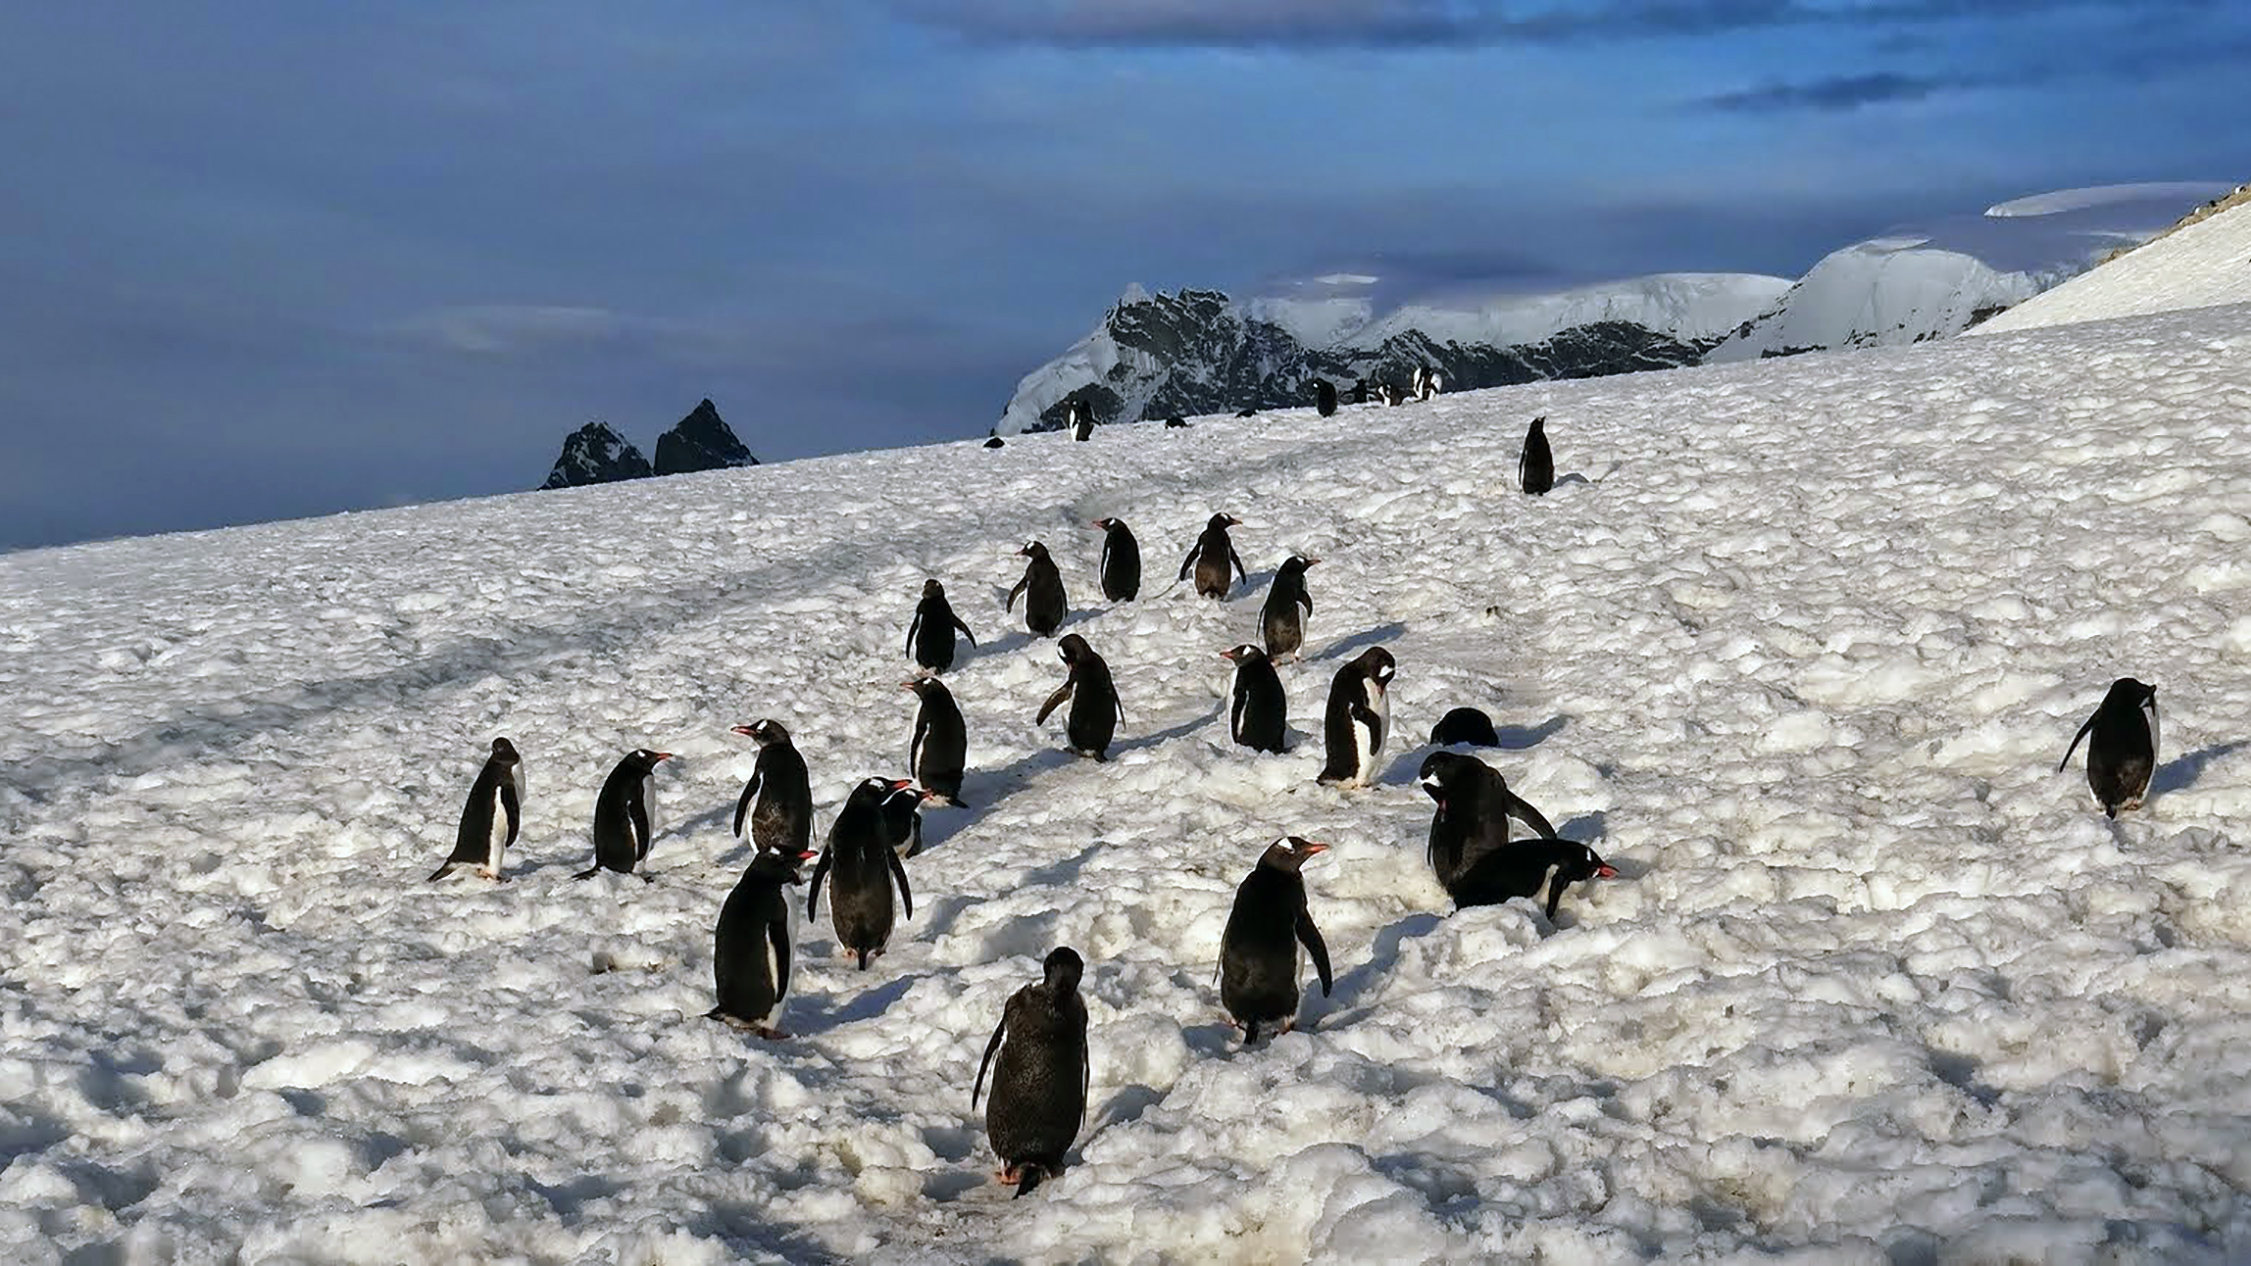 During an excursion to Danco Island, we ran into a colony of gentoo penguins scurrying about in the snow.